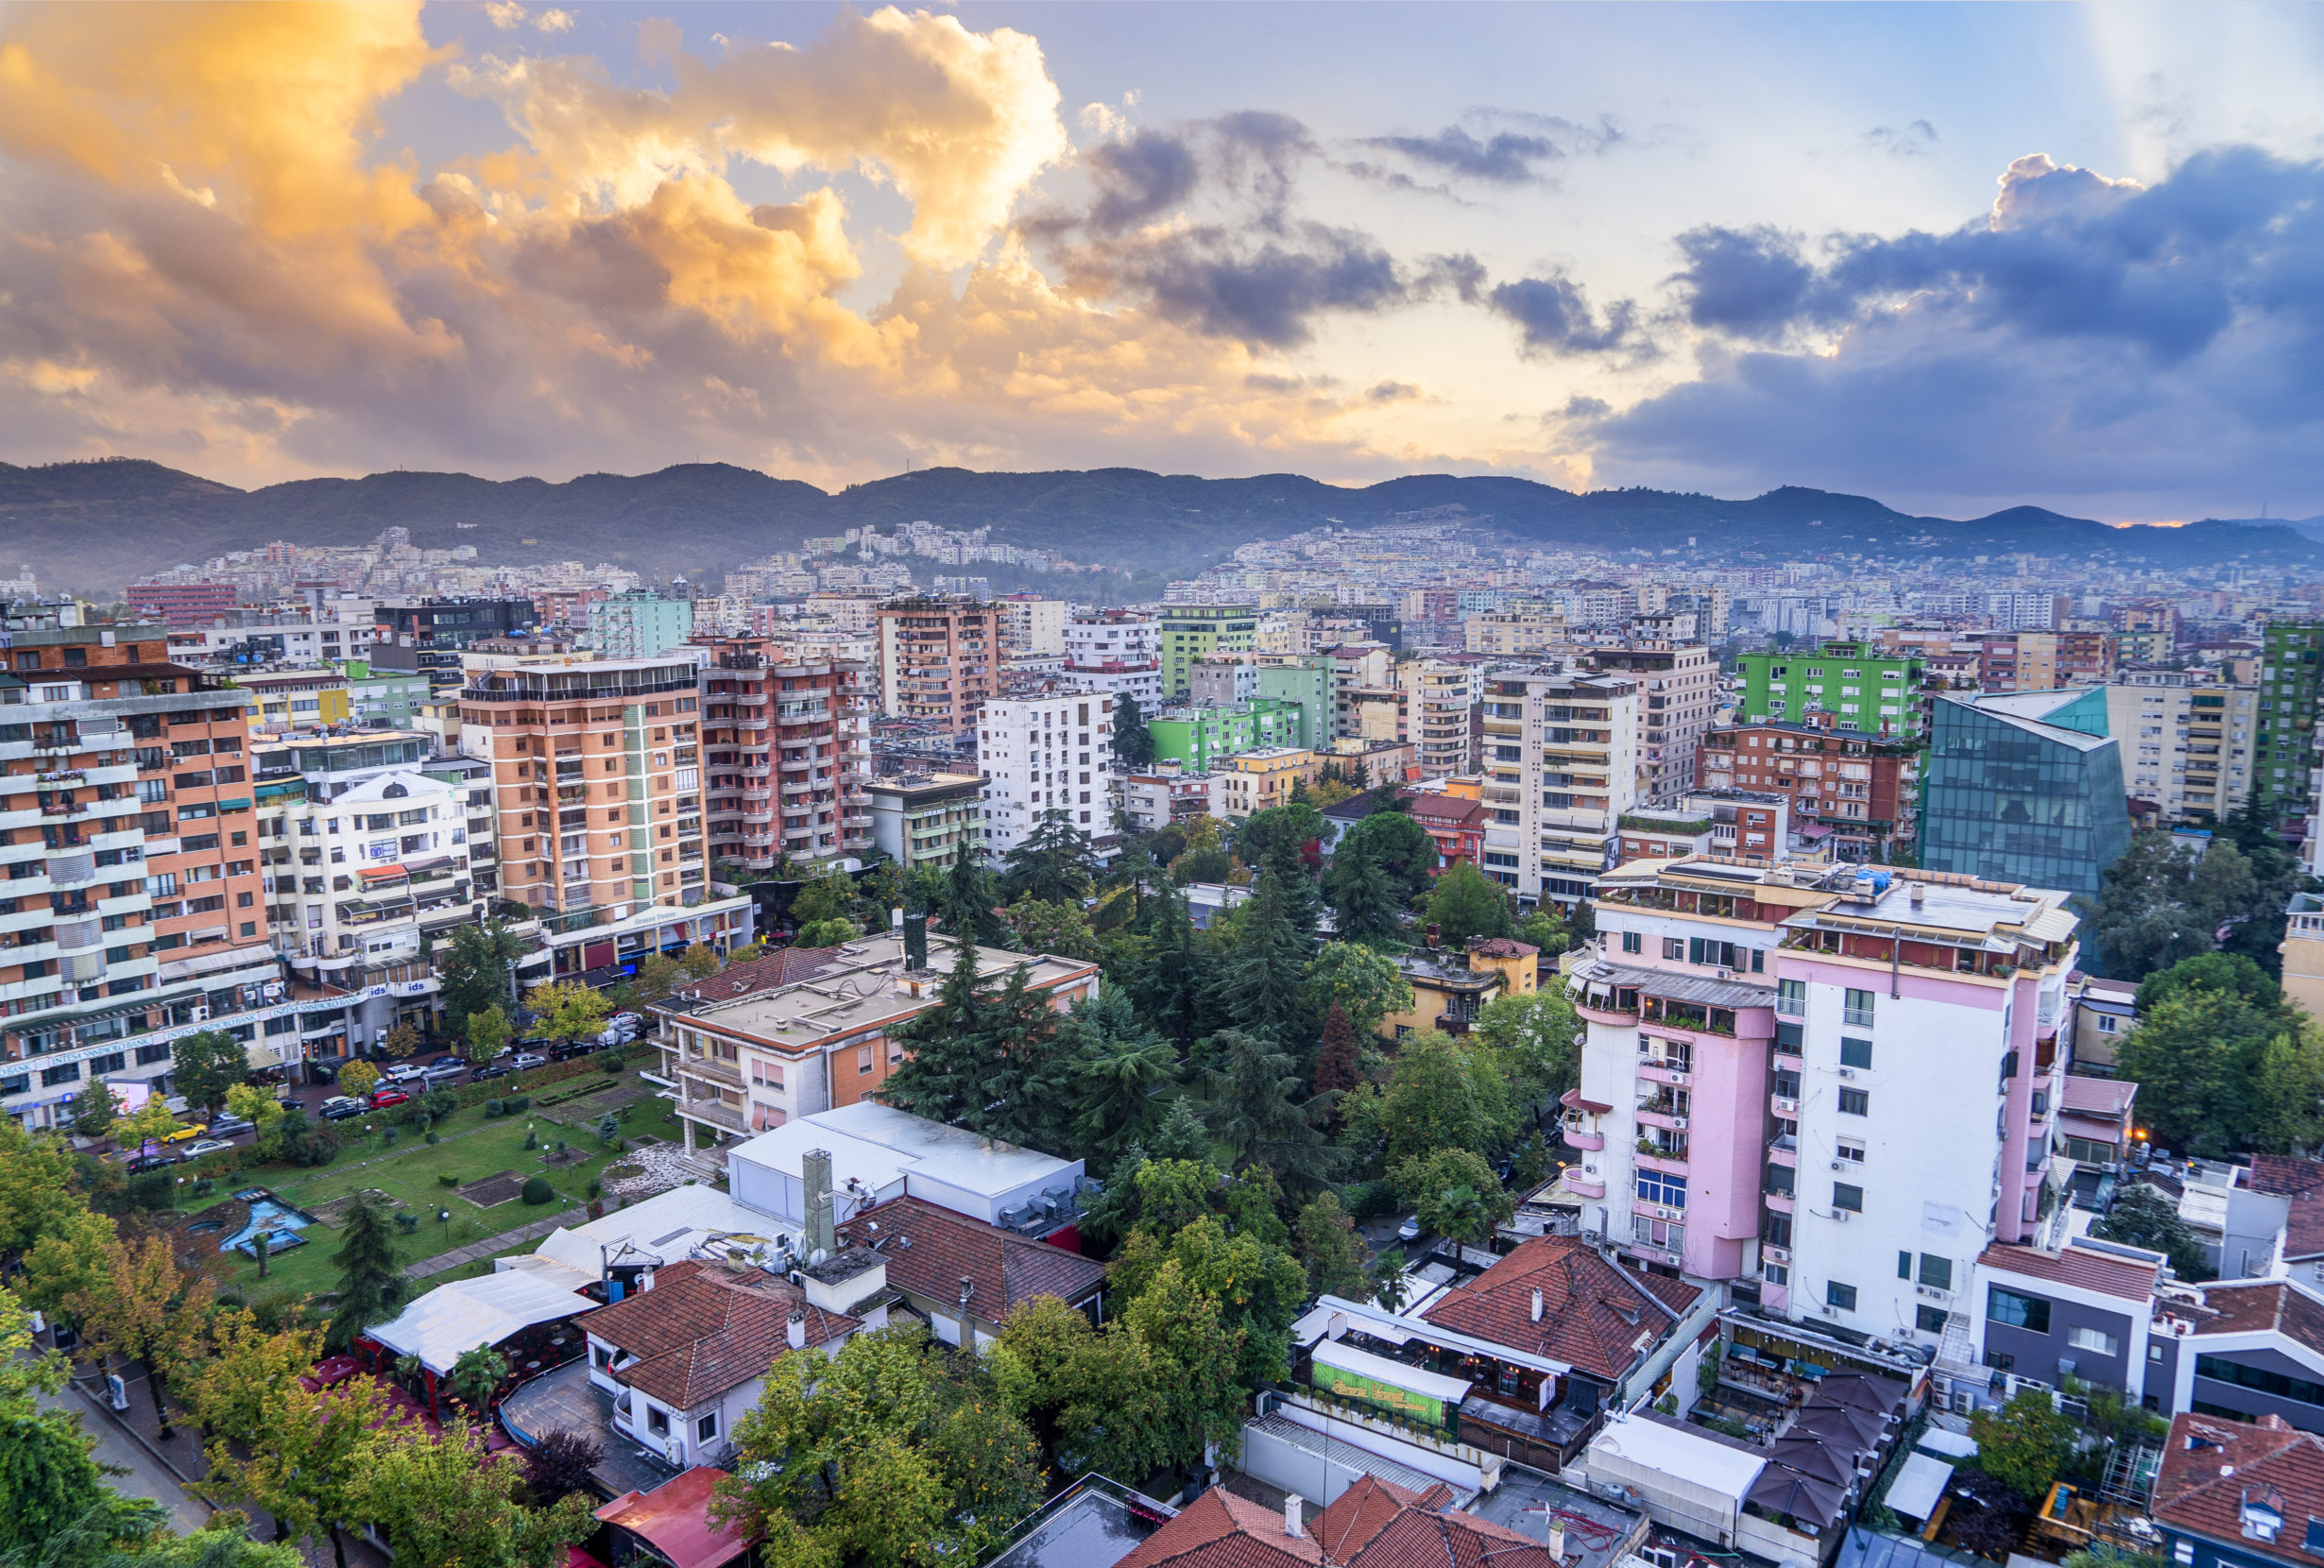 Colorful high-rises framed by the foothills of Mount Dajti make for photogenic vistas in Albania's capital city of Tirana. Photo: Adonis Abril/Adobe.